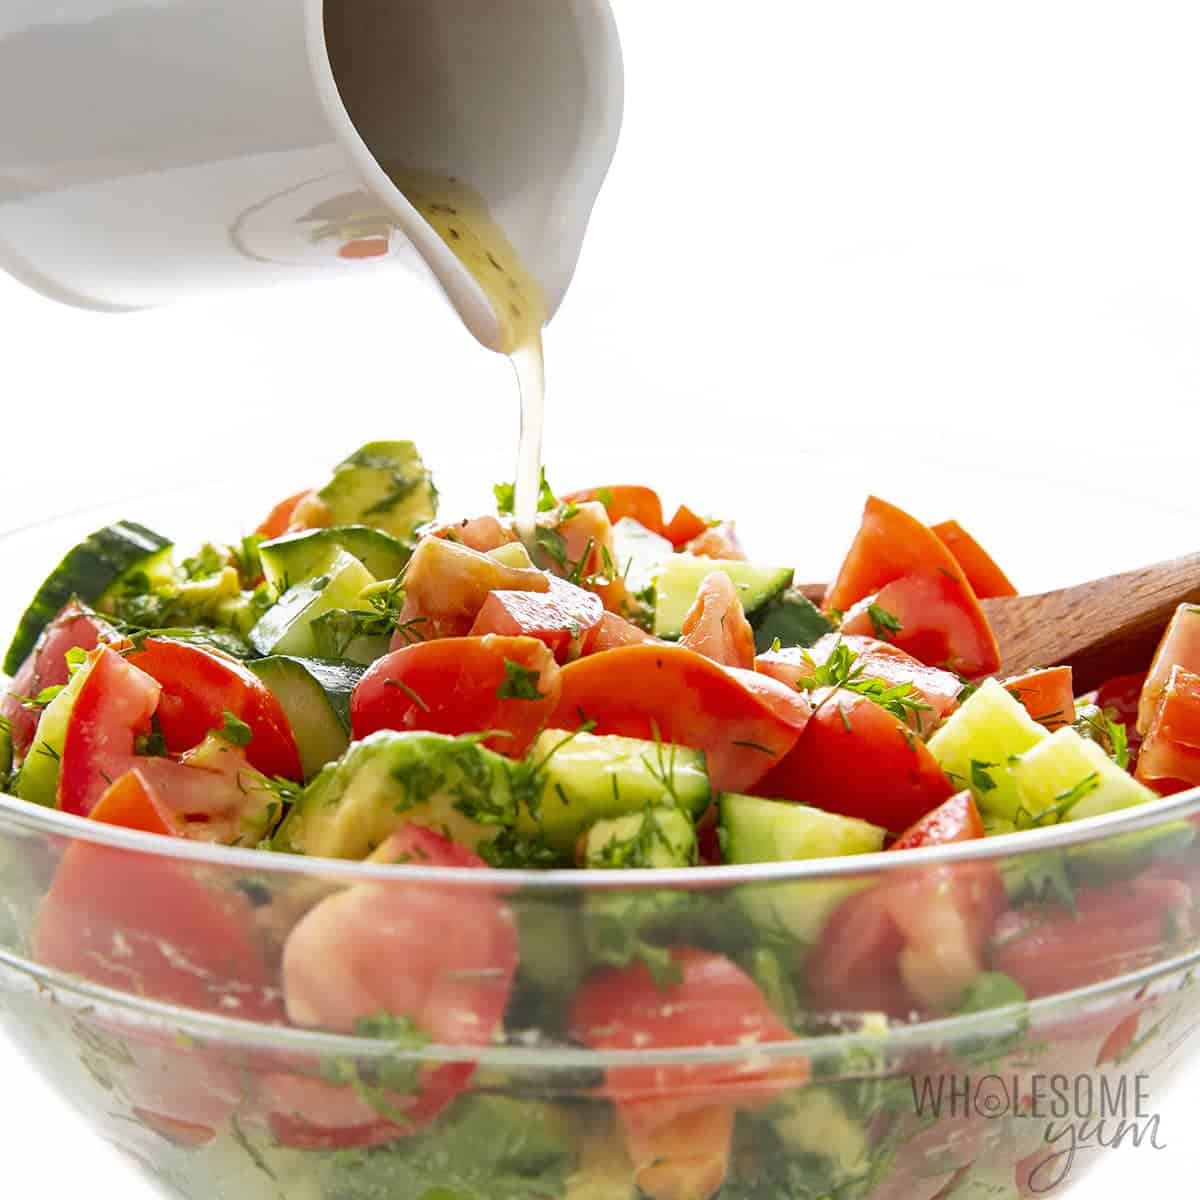 Pouring dressing over salad with tomatoes, avocado, and cucumbers